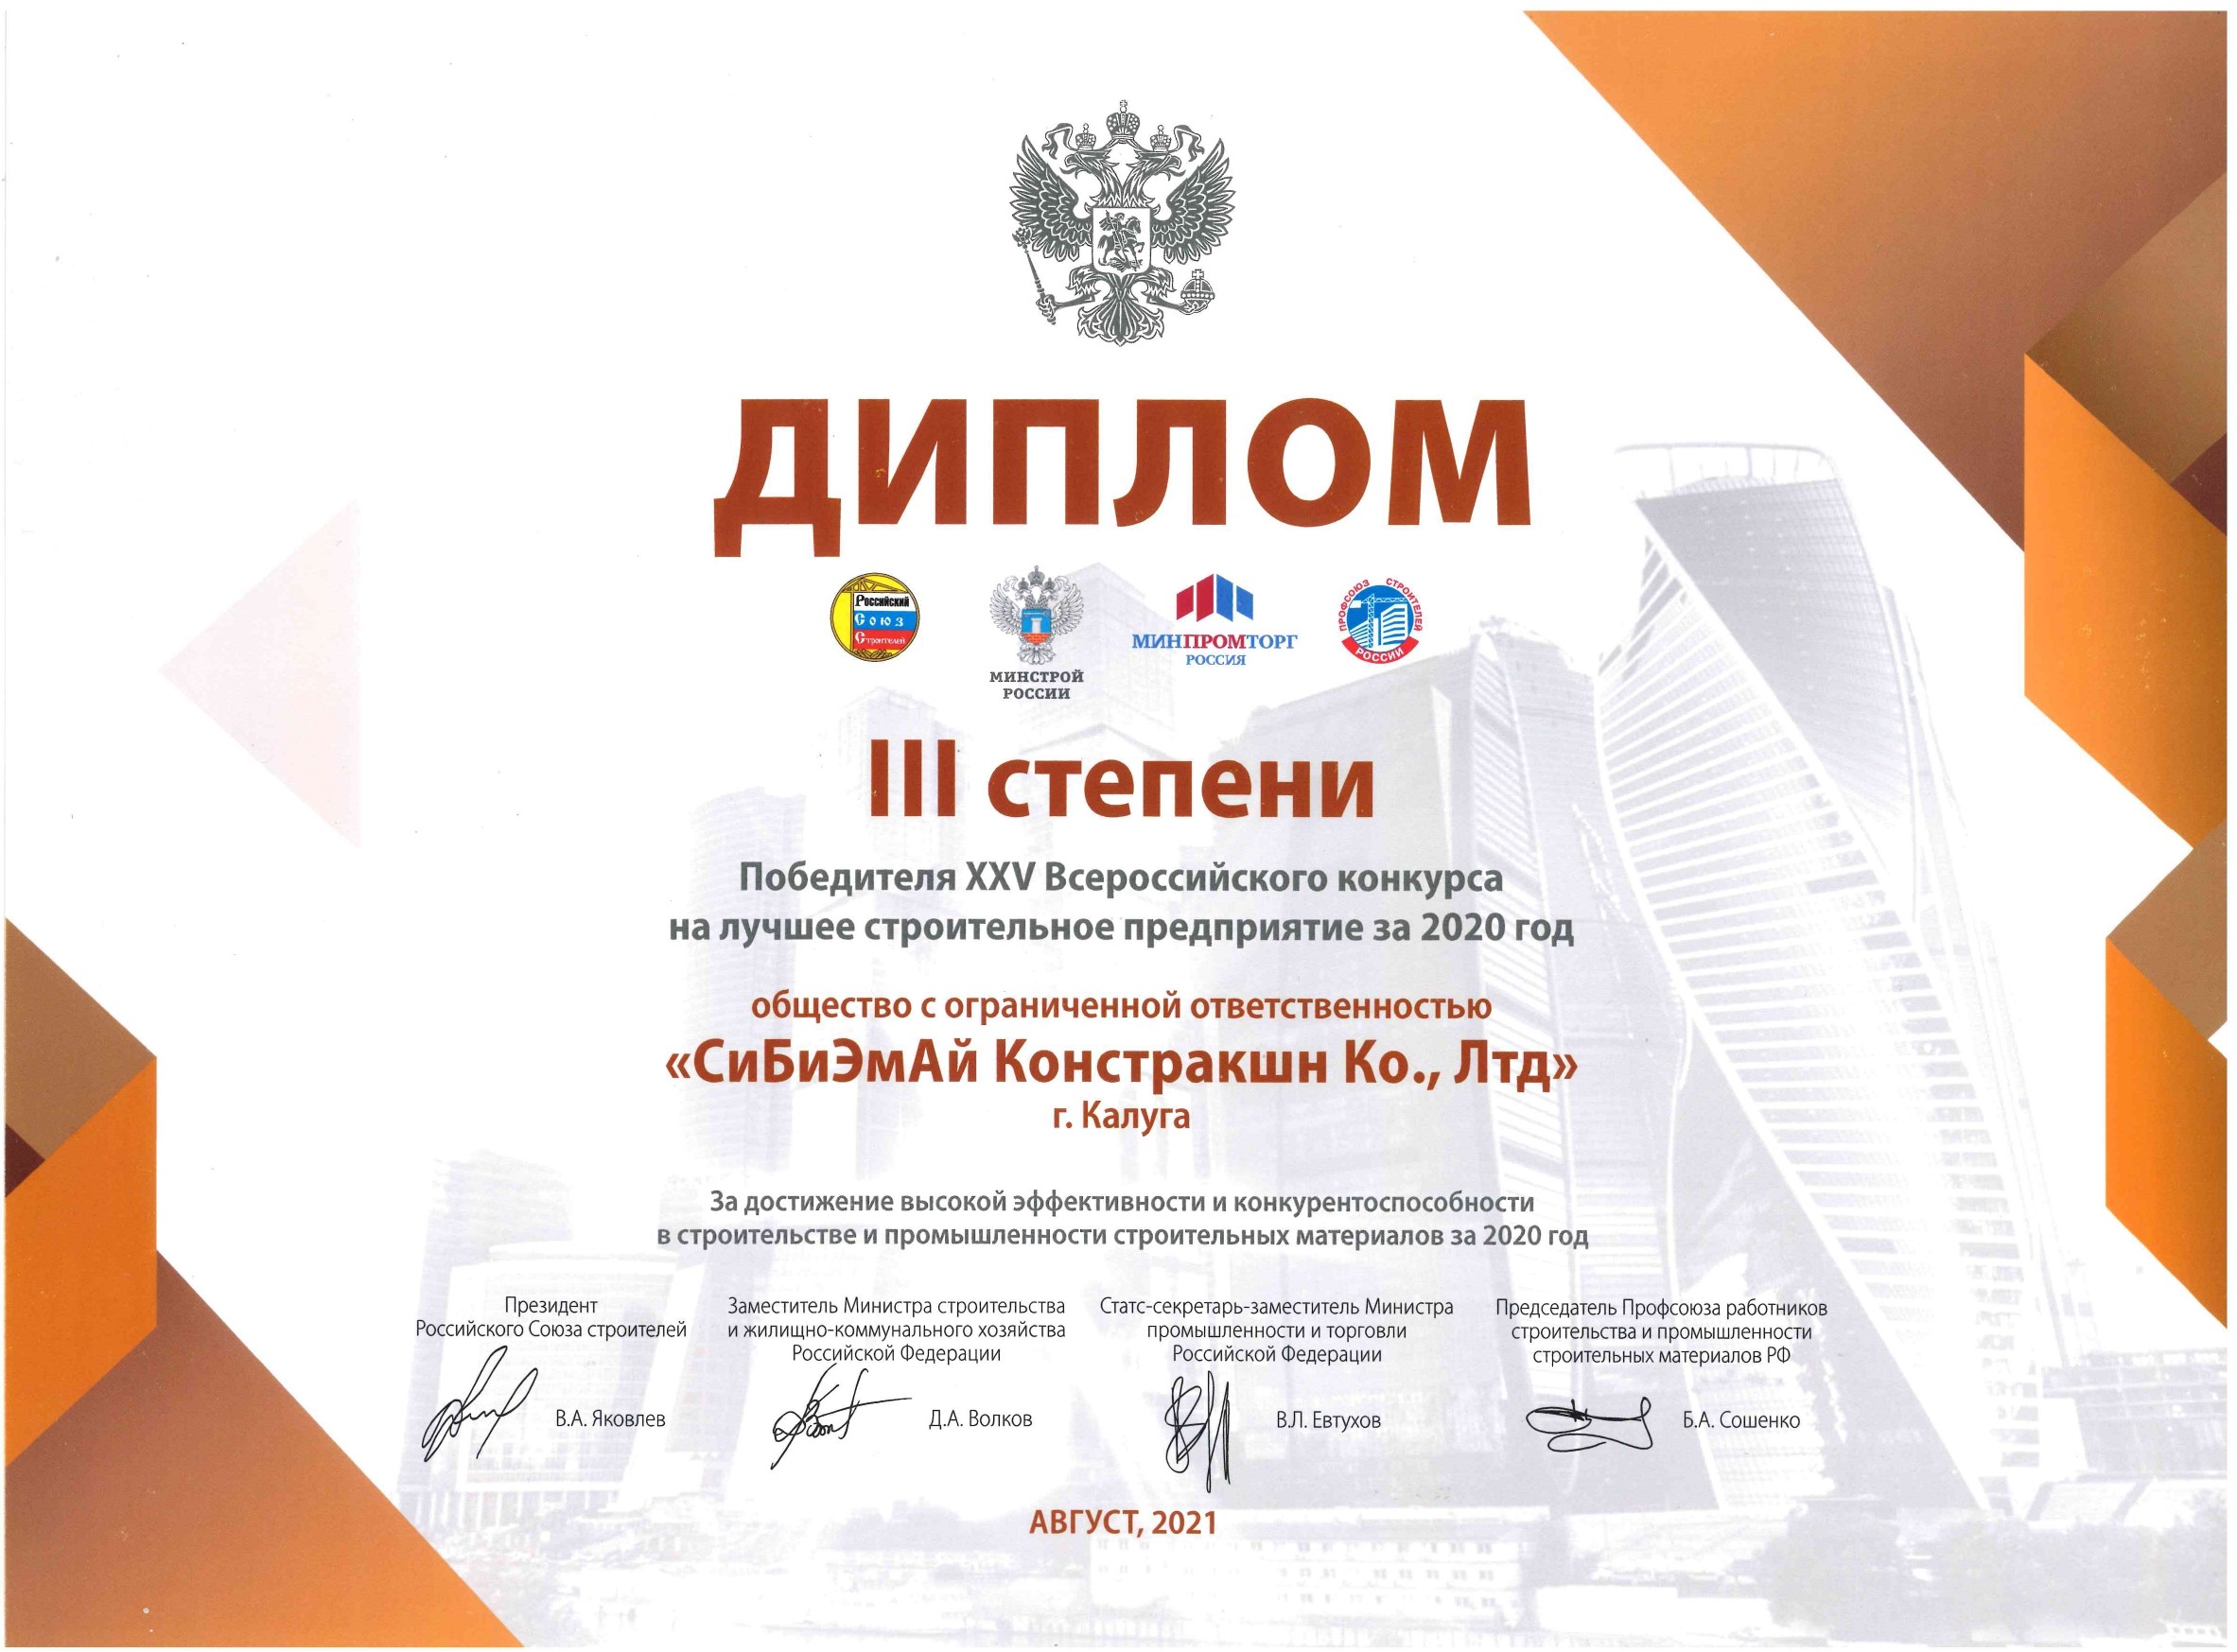 Sinoma CBMI became the winner of the XXV All-Russian competition for the best construction company in 2020